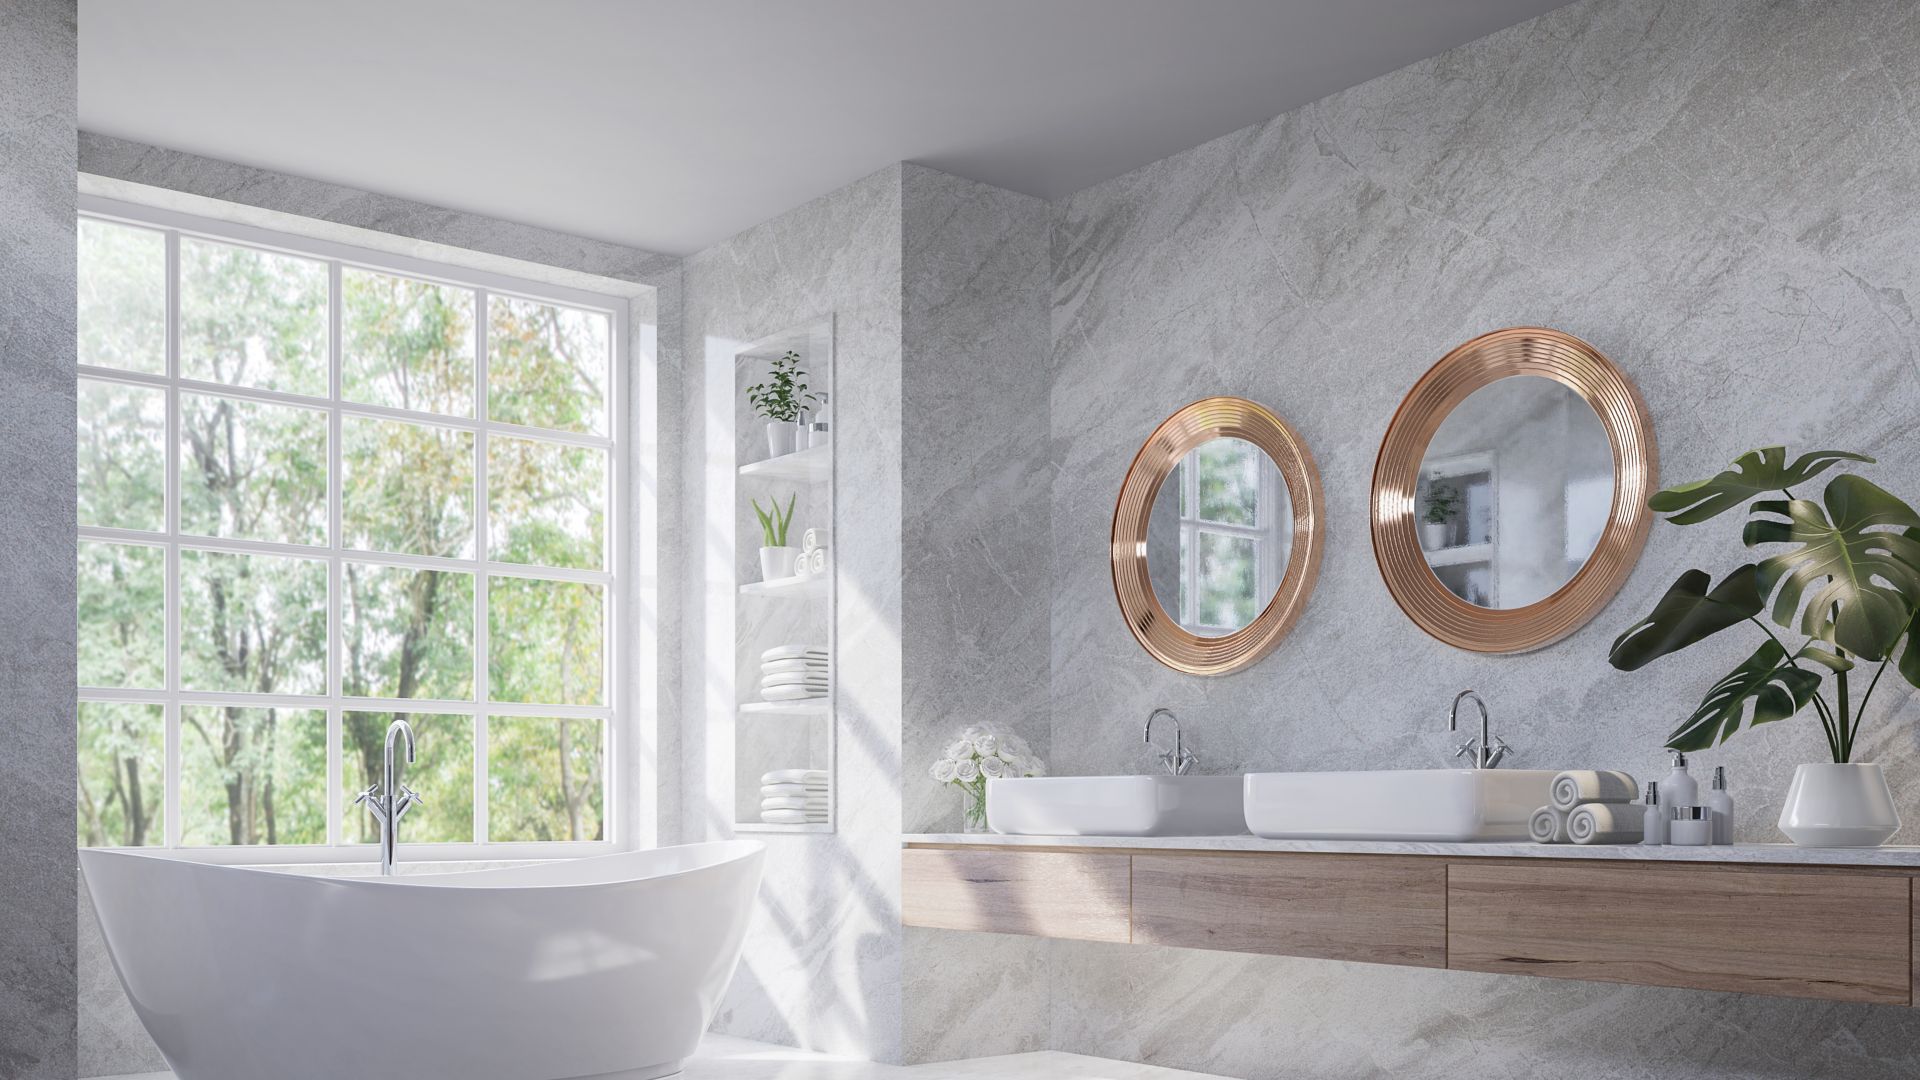 Luxury style light gray bathroom 3d render,There are marble floor and wall ,wooden sink counter and copper frame mirror,Rooms have large windows, overlook nature view,sunlight shining into the room.